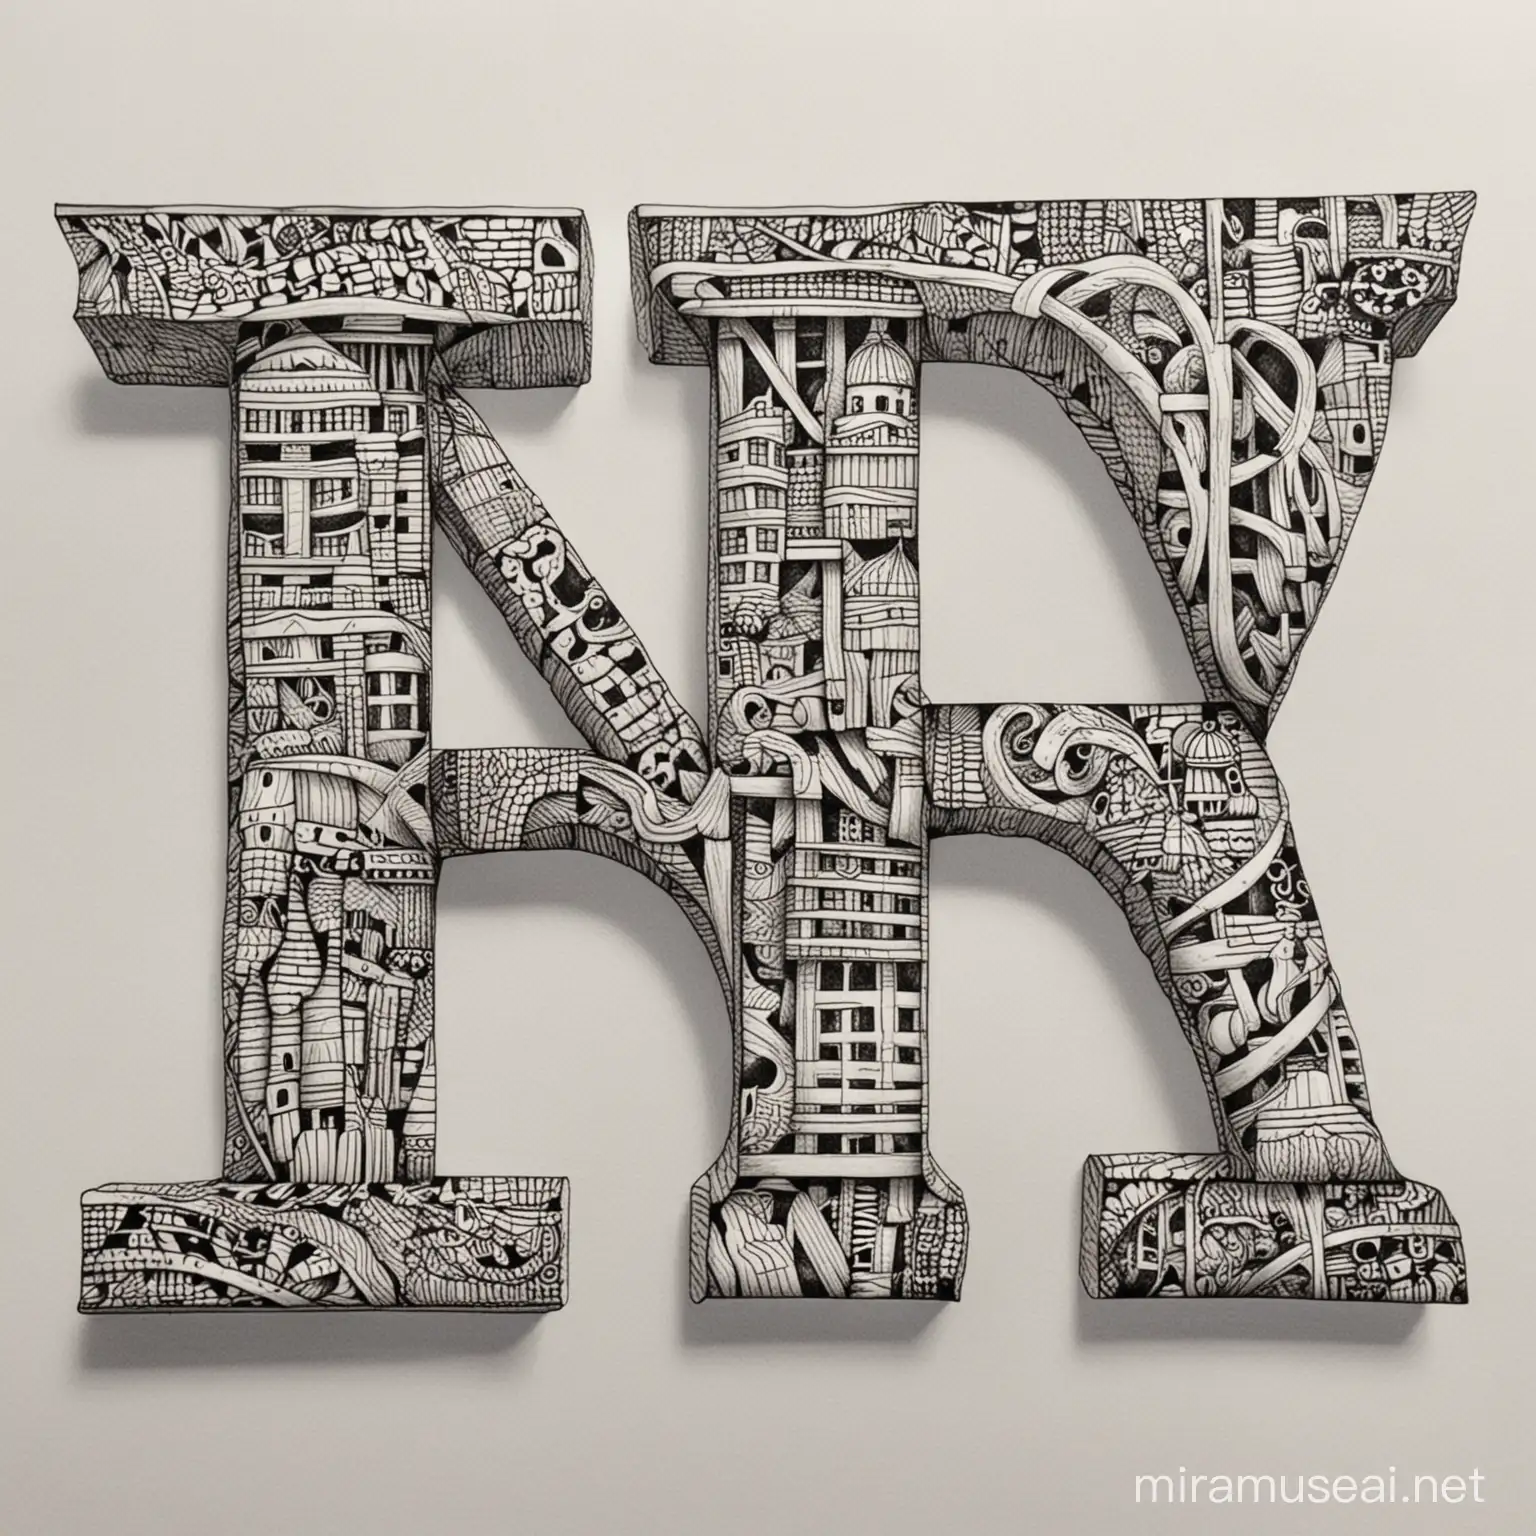 create a zentangle design for letter "N" written with shapes of building structures
 
